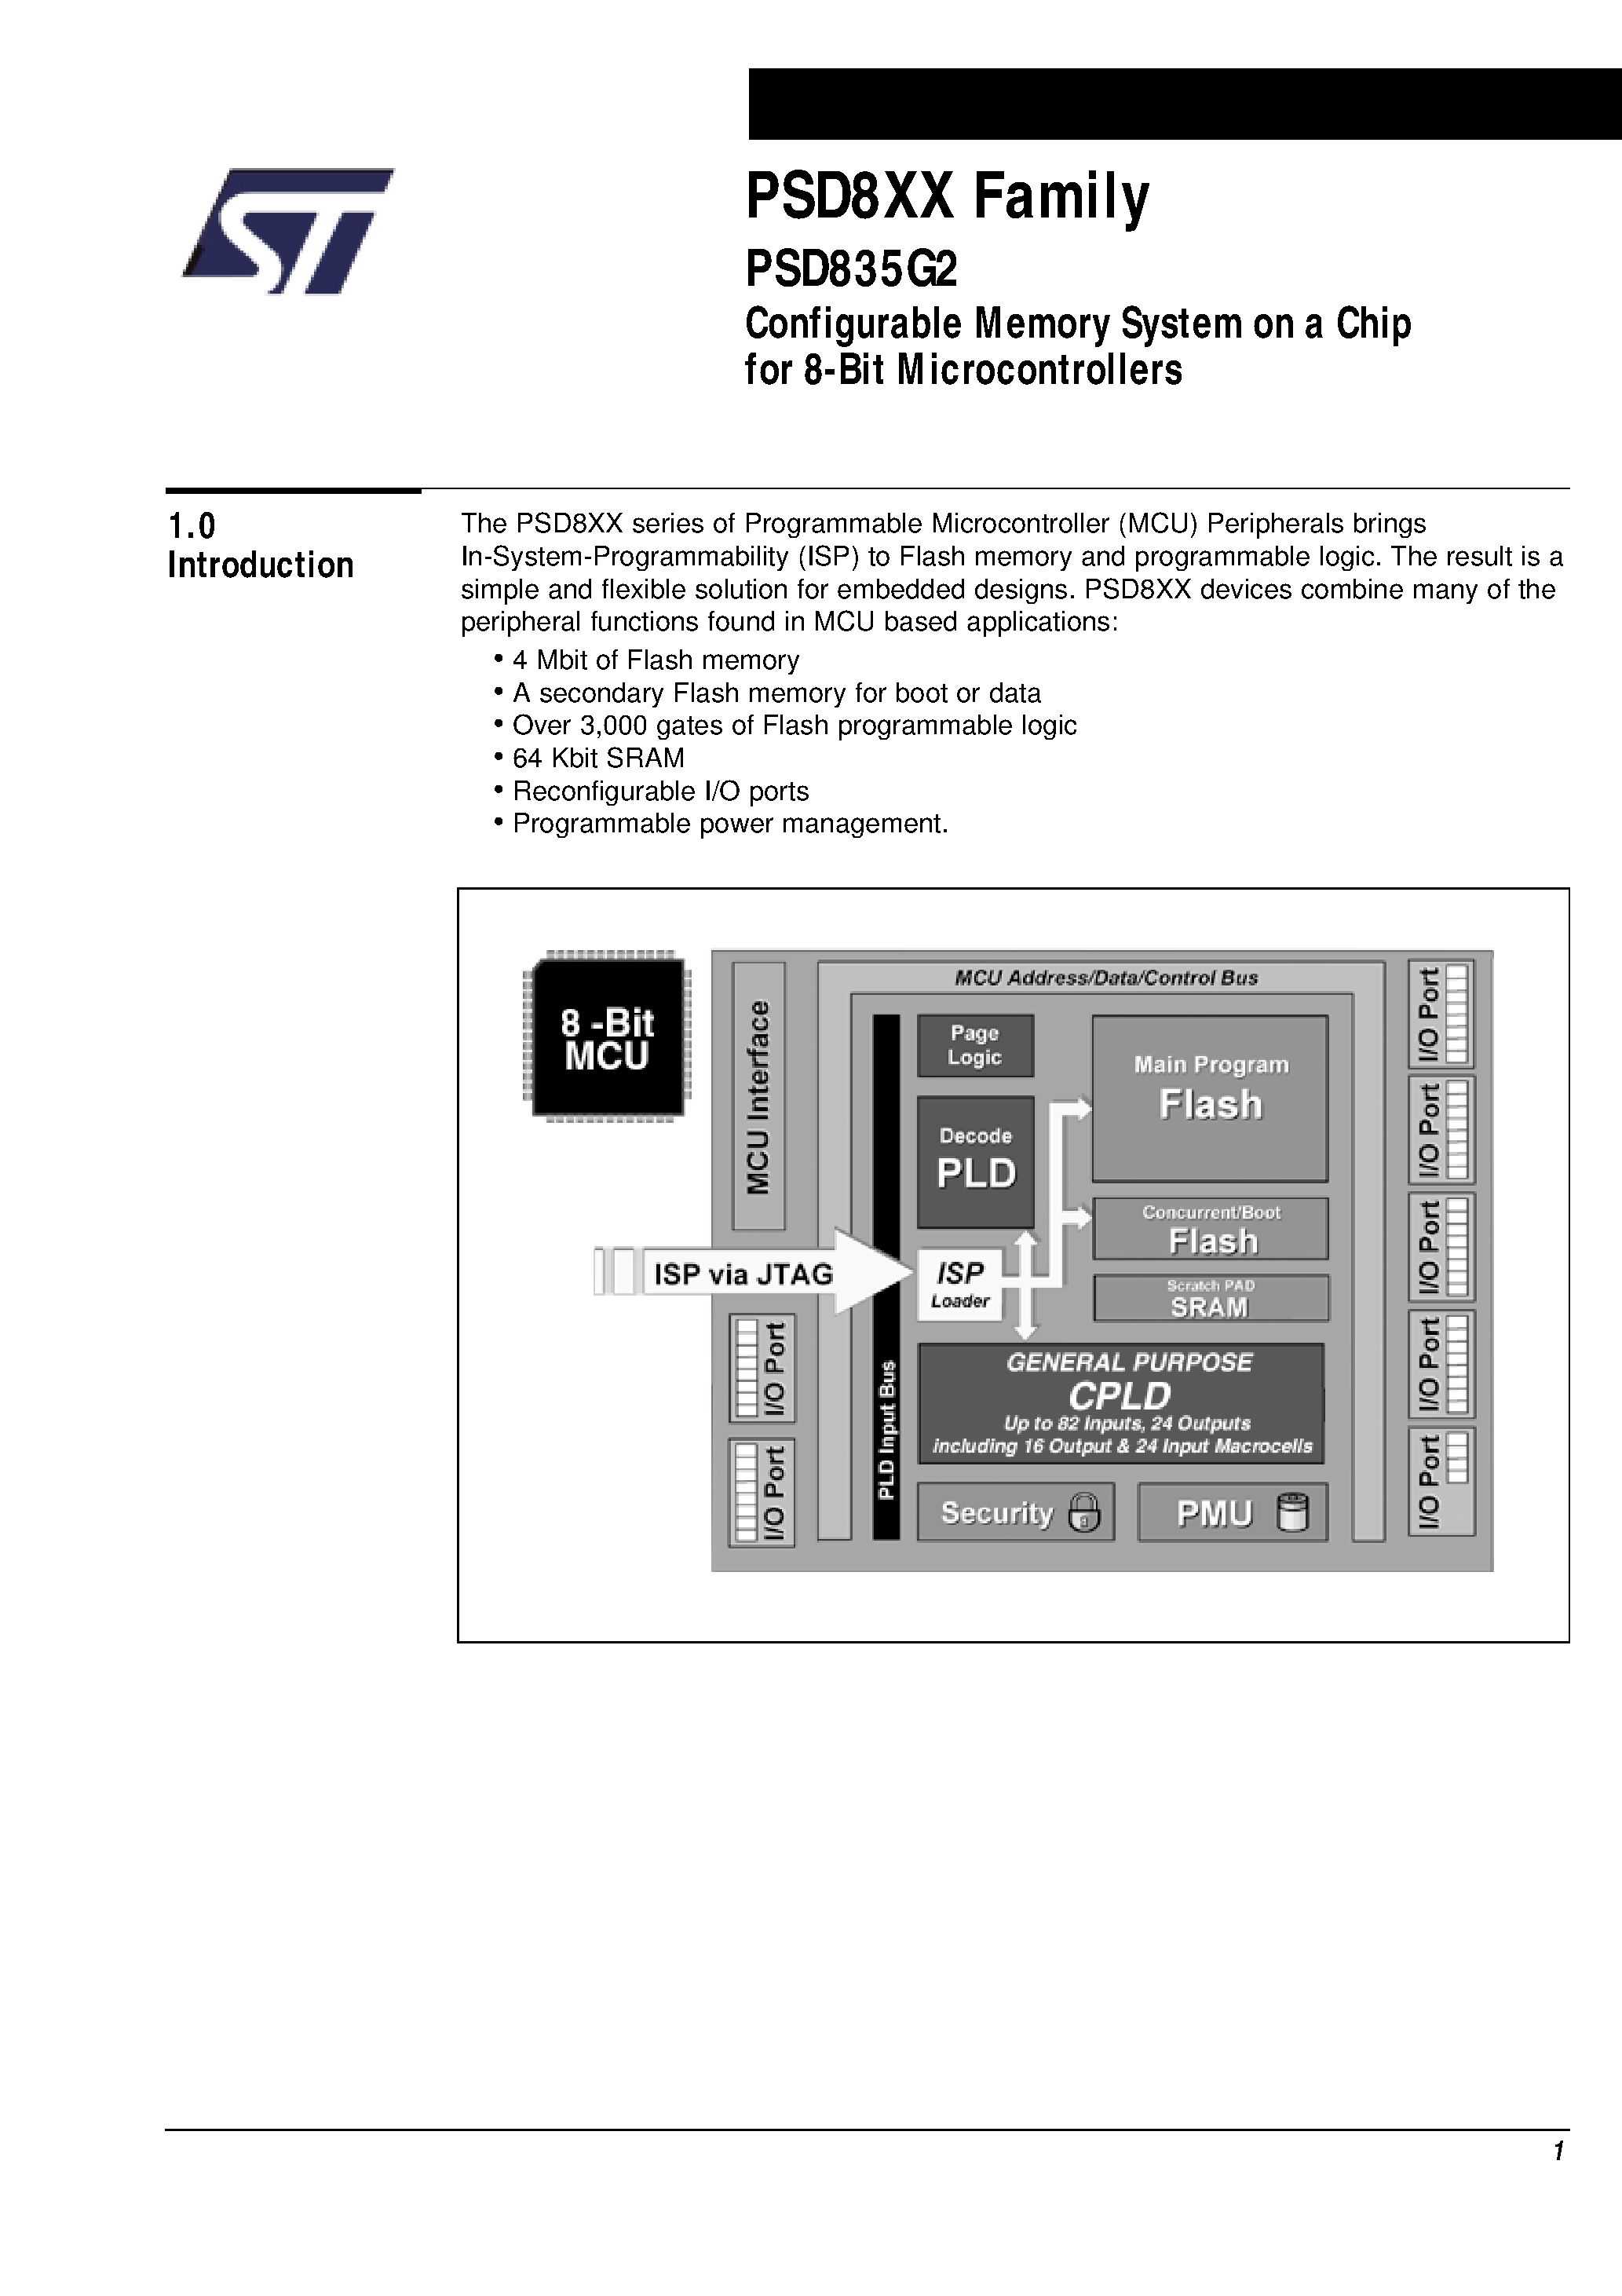 Datasheet PSD835F2V-A-15JI - Configurable Memory System on a Chip for 8-Bit Microcontrollers page 2